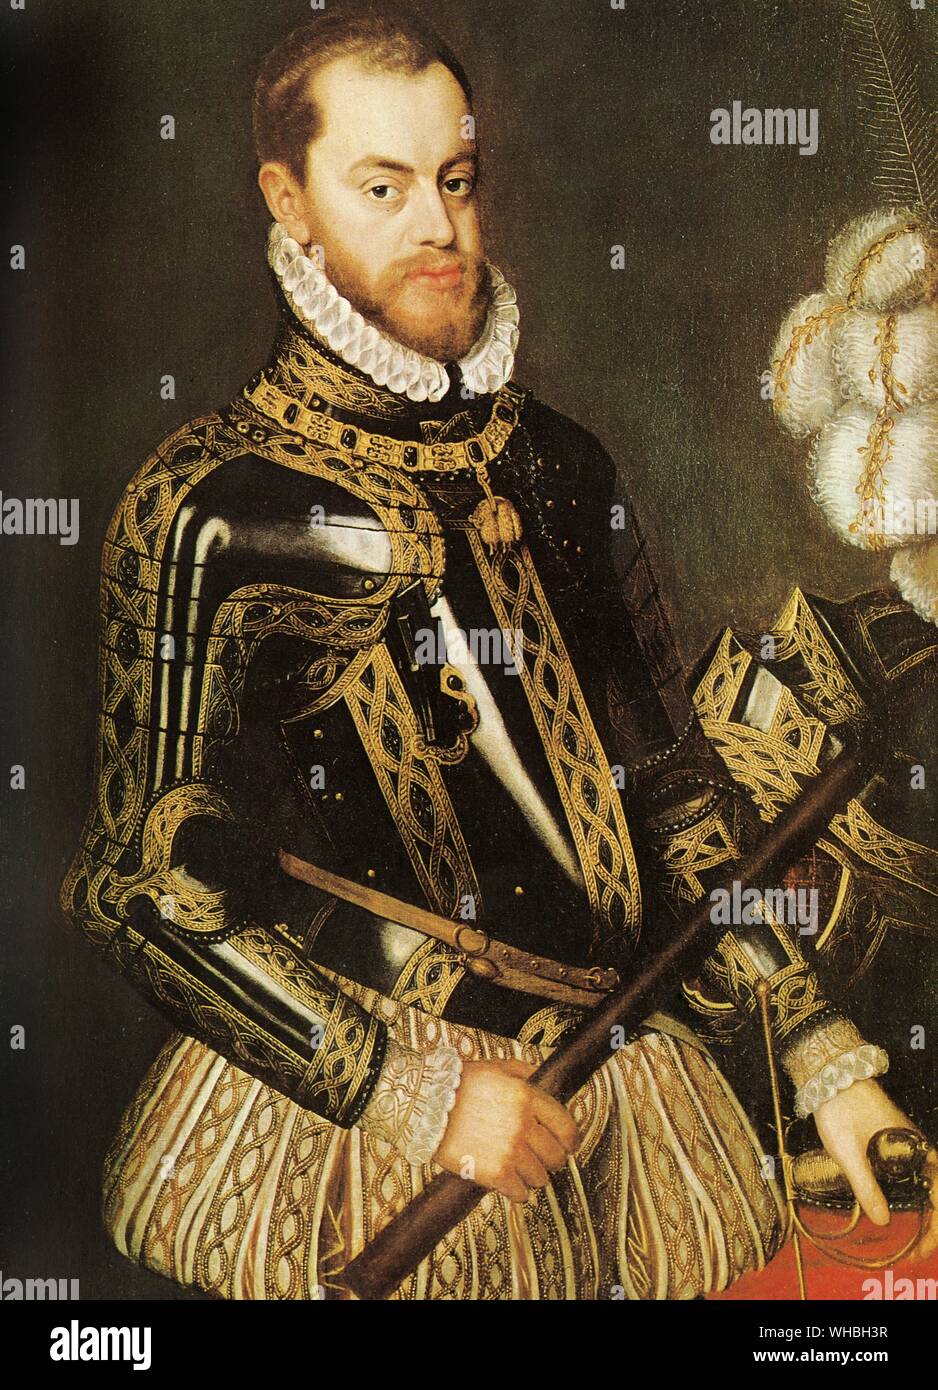 King Philip II, an able but inflexible ruler, strove to conquer England for Catholic Spain.. Philip II (May 21, 1527 - September 13, 1598) was King of Spain from 1556 until 1598, King of Naples from 1554 until 1598, king consort of England (as husband of Mary I) from 1554 to 1558, Lord of the Seventeen Provinces (holding various titles for the individual territories, such as Duke or Count) from 1556 until 1581, King of Portugal and the Algarves (as Philip I) from 1580 until 1598 and King of Chile from 1554 until 1556. Philip II is considered one of the greatest sovereigns in the History of Stock Photo